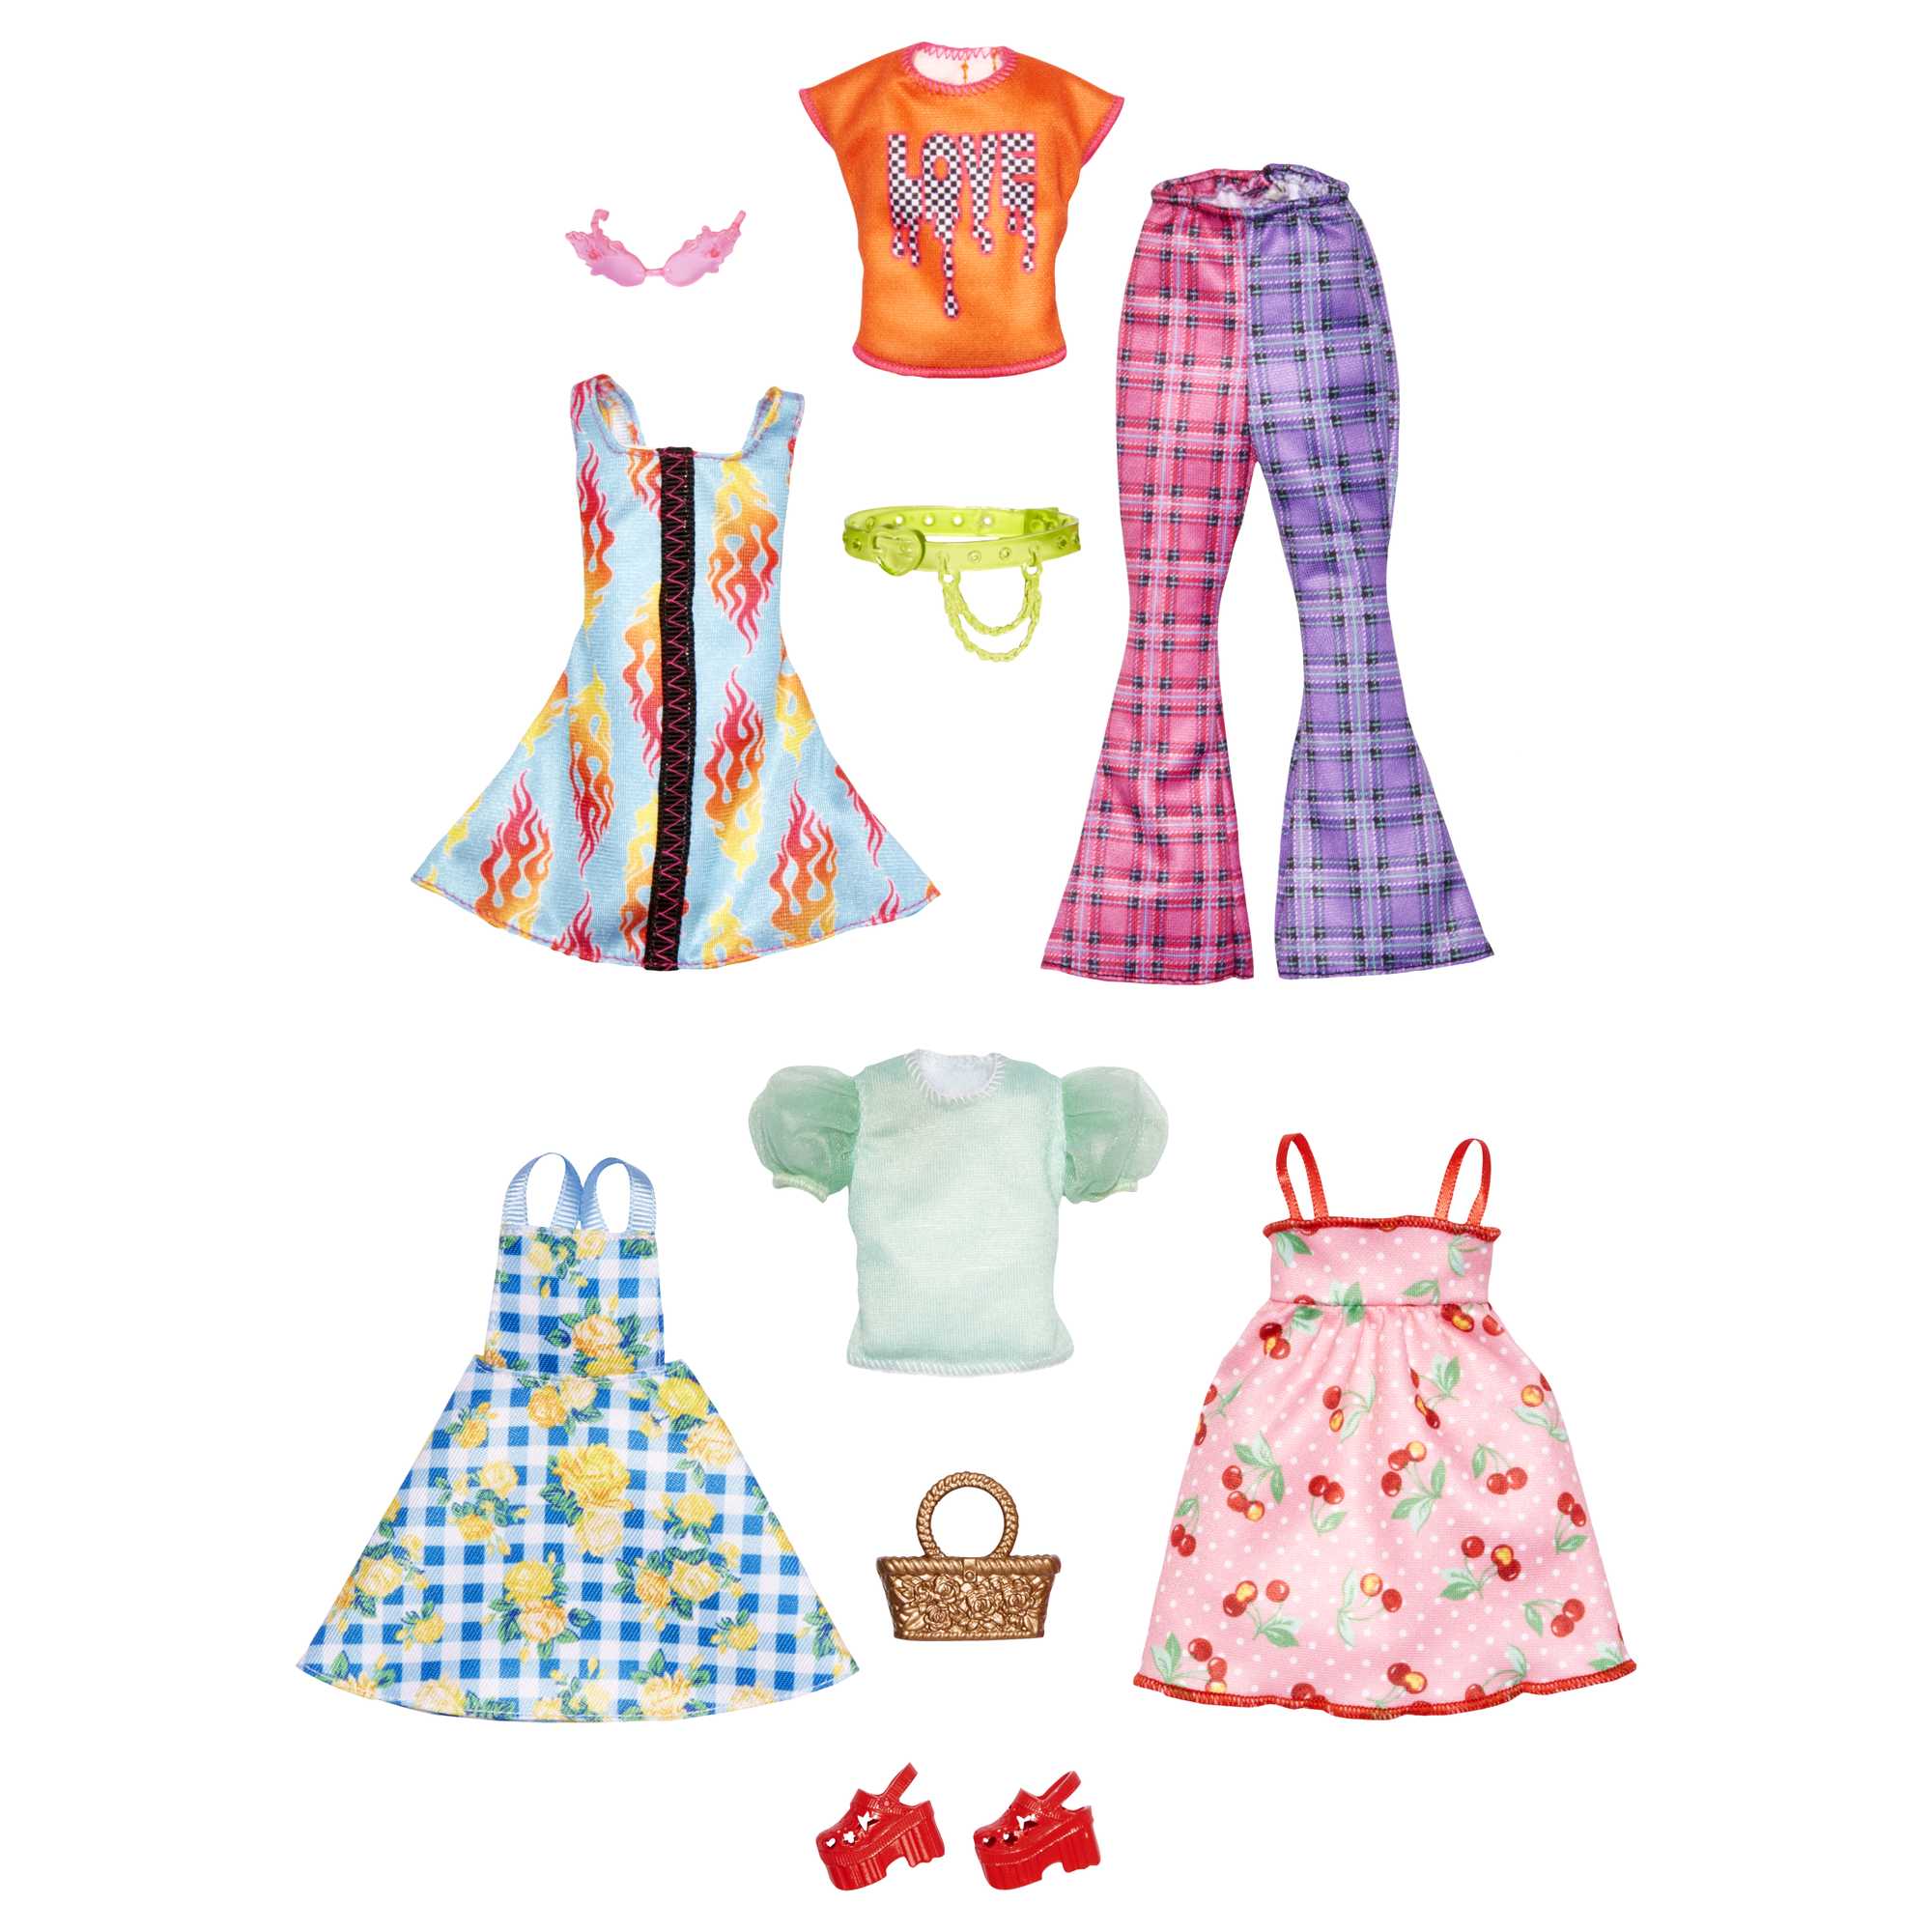 Barbie Clothes and Accessories, Fashion 2-Packs